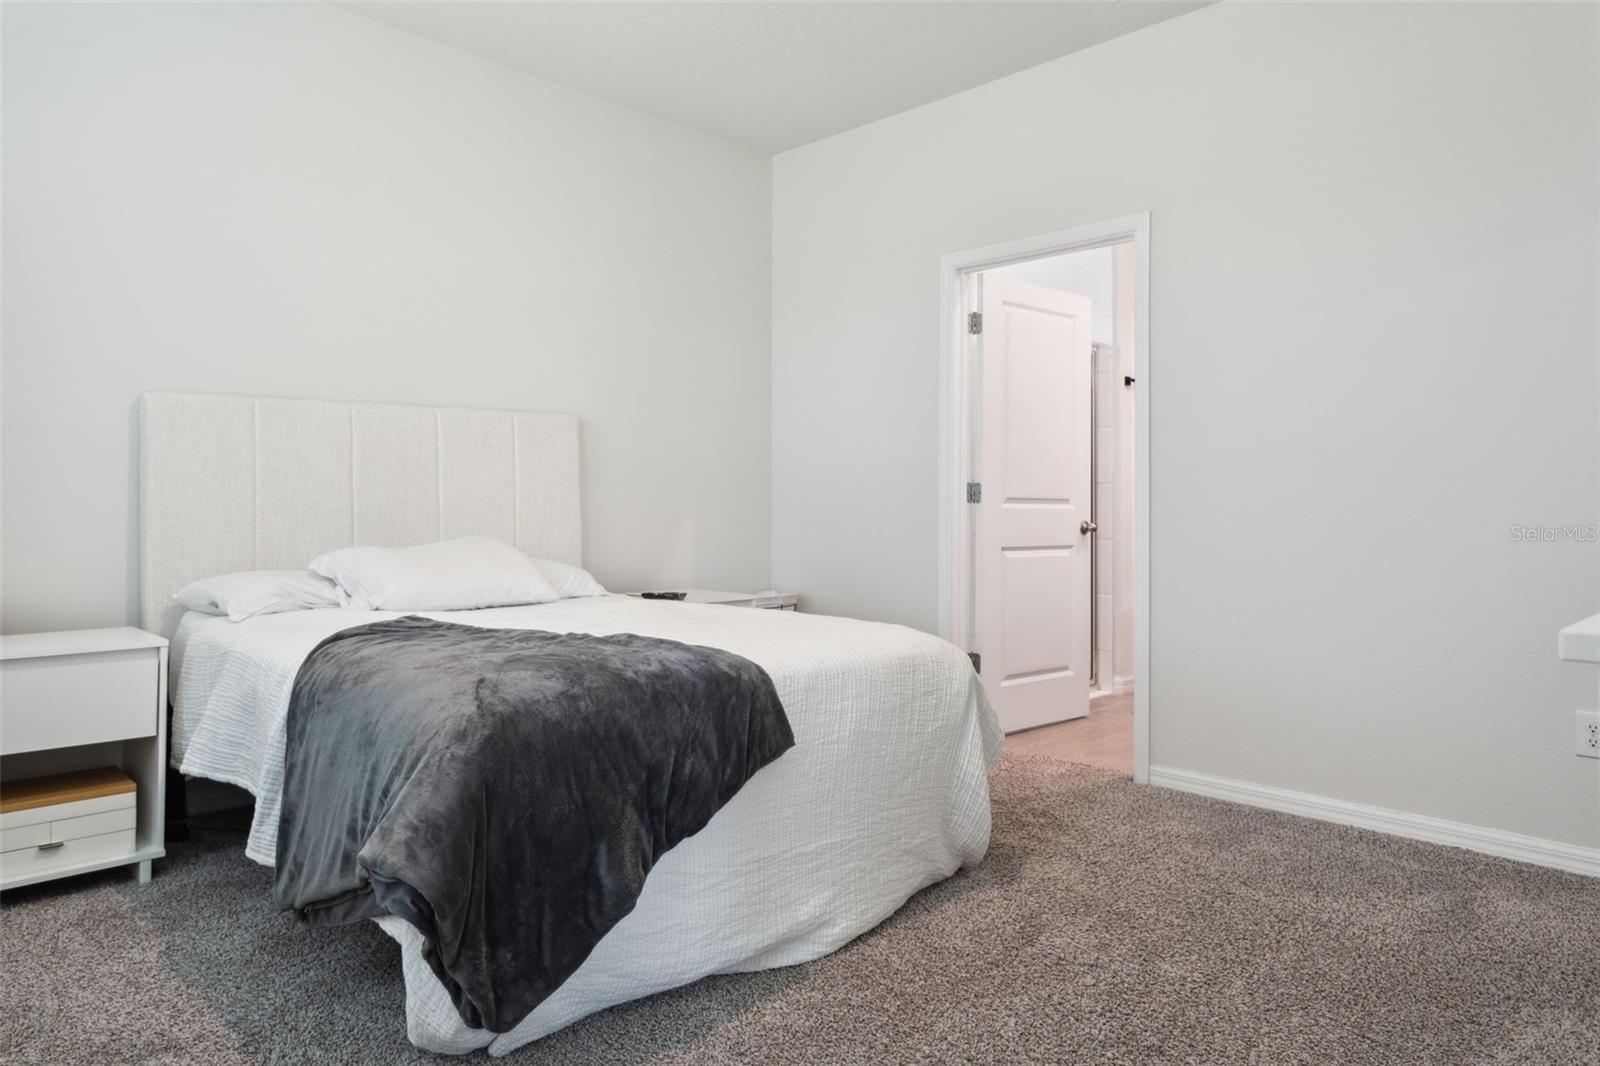 Primary suite is on the first floor with ensuite bath and walk in closet.